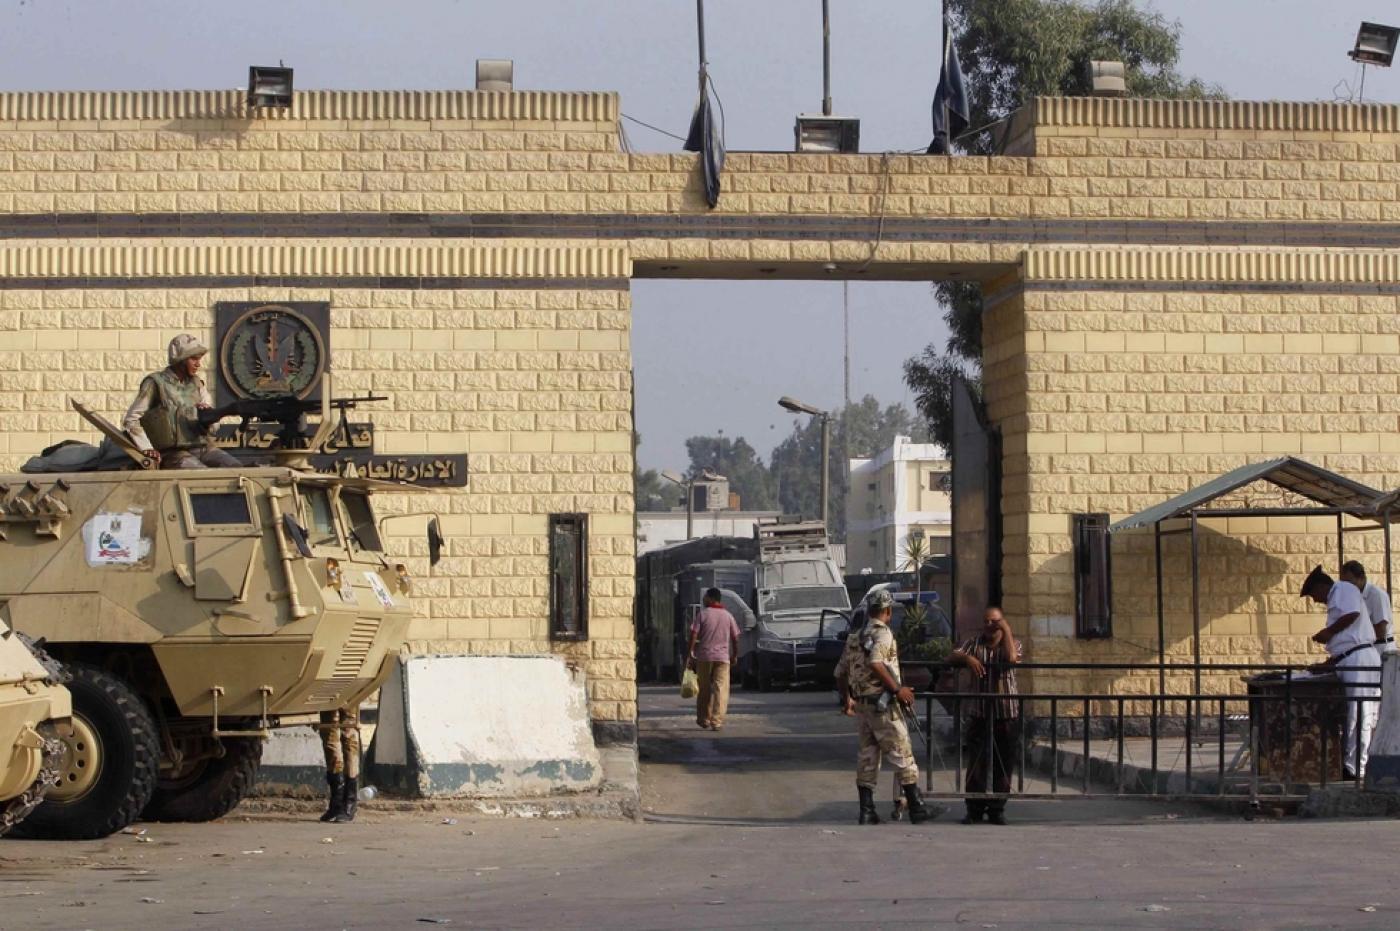 Outside Scorpion Prison where Shal was held in Cairo (Reuters)